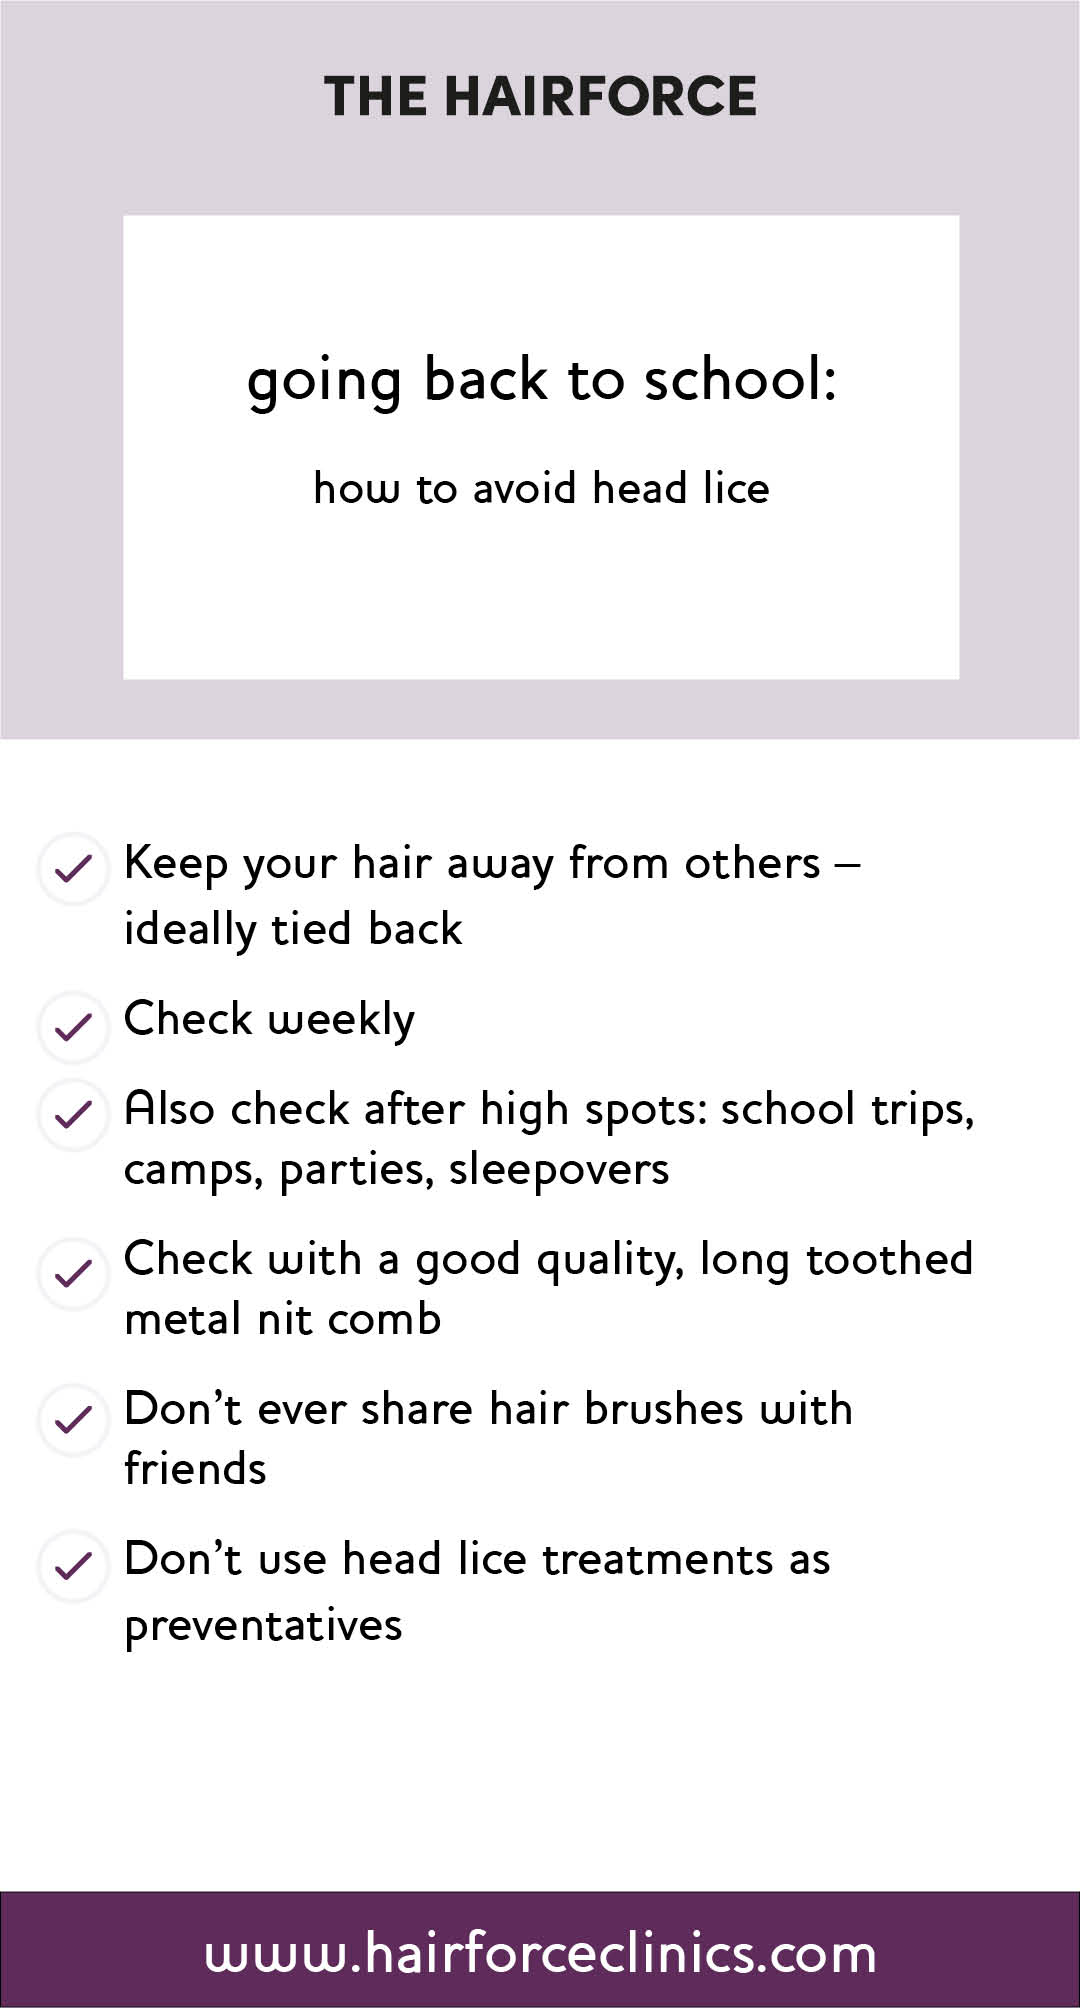 How to prevent head lice at school | The Hairforce Clinics